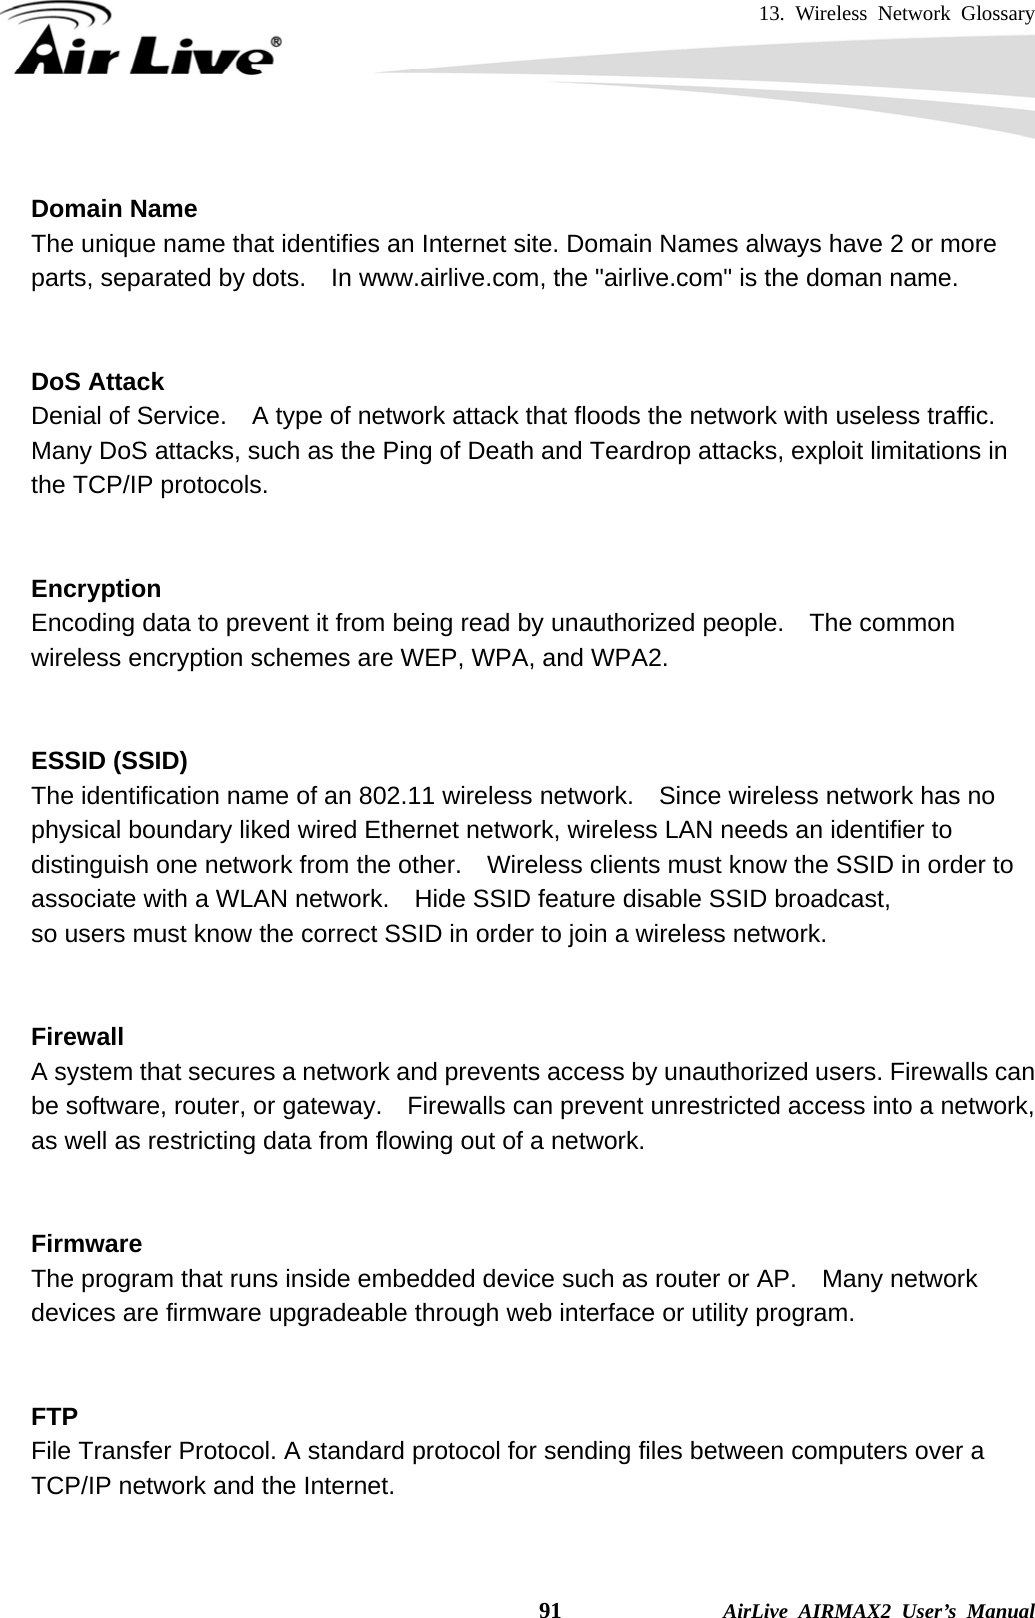 13. Wireless Network Glossary    91              AirLive AIRMAX2 User’s Manual  Domain Name The unique name that identifies an Internet site. Domain Names always have 2 or more parts, separated by dots.    In www.airlive.com, the &quot;airlive.com&quot; is the doman name.   DoS Attack Denial of Service.    A type of network attack that floods the network with useless traffic. Many DoS attacks, such as the Ping of Death and Teardrop attacks, exploit limitations in the TCP/IP protocols.   Encryption Encoding data to prevent it from being read by unauthorized people.  The common wireless encryption schemes are WEP, WPA, and WPA2.   ESSID (SSID) The identification name of an 802.11 wireless network.    Since wireless network has no physical boundary liked wired Ethernet network, wireless LAN needs an identifier to distinguish one network from the other.  Wireless clients must know the SSID in order to associate with a WLAN network.    Hide SSID feature disable SSID broadcast,   so users must know the correct SSID in order to join a wireless network.   Firewall A system that secures a network and prevents access by unauthorized users. Firewalls can be software, router, or gateway.    Firewalls can prevent unrestricted access into a network, as well as restricting data from flowing out of a network.   Firmware The program that runs inside embedded device such as router or AP.    Many network devices are firmware upgradeable through web interface or utility program.   FTP File Transfer Protocol. A standard protocol for sending files between computers over a TCP/IP network and the Internet.   